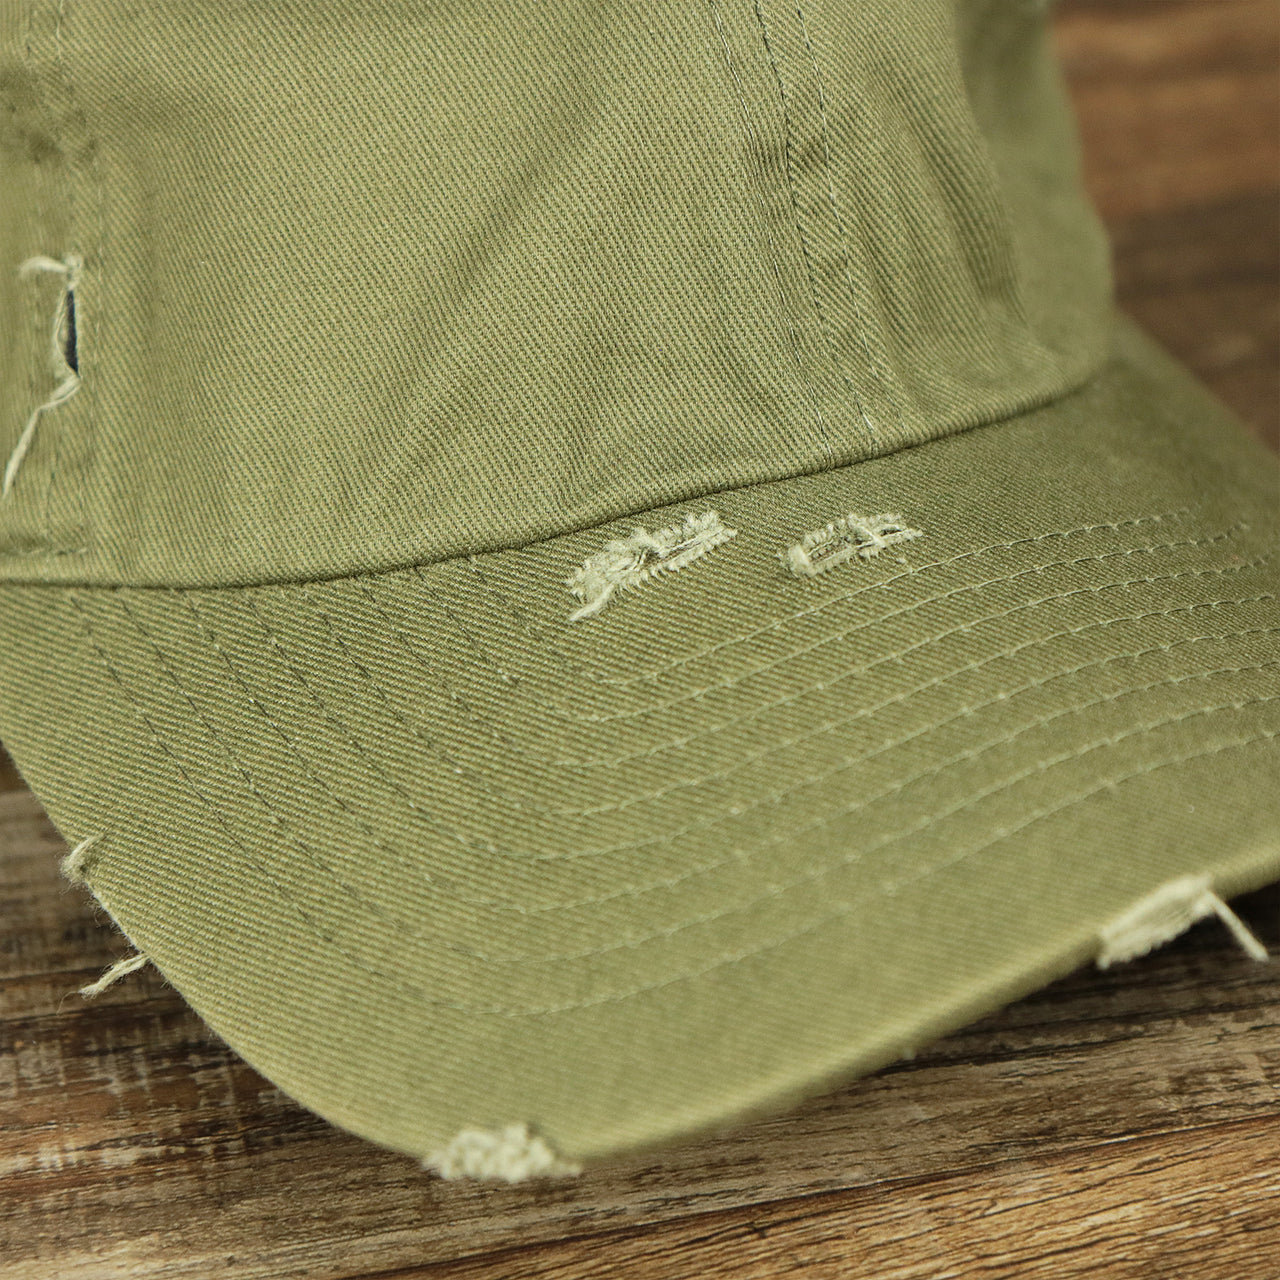 The visor on the Olive Green Low Crown Distressed Adjustable Blank Baseball hat | Dark Green Dad Hat